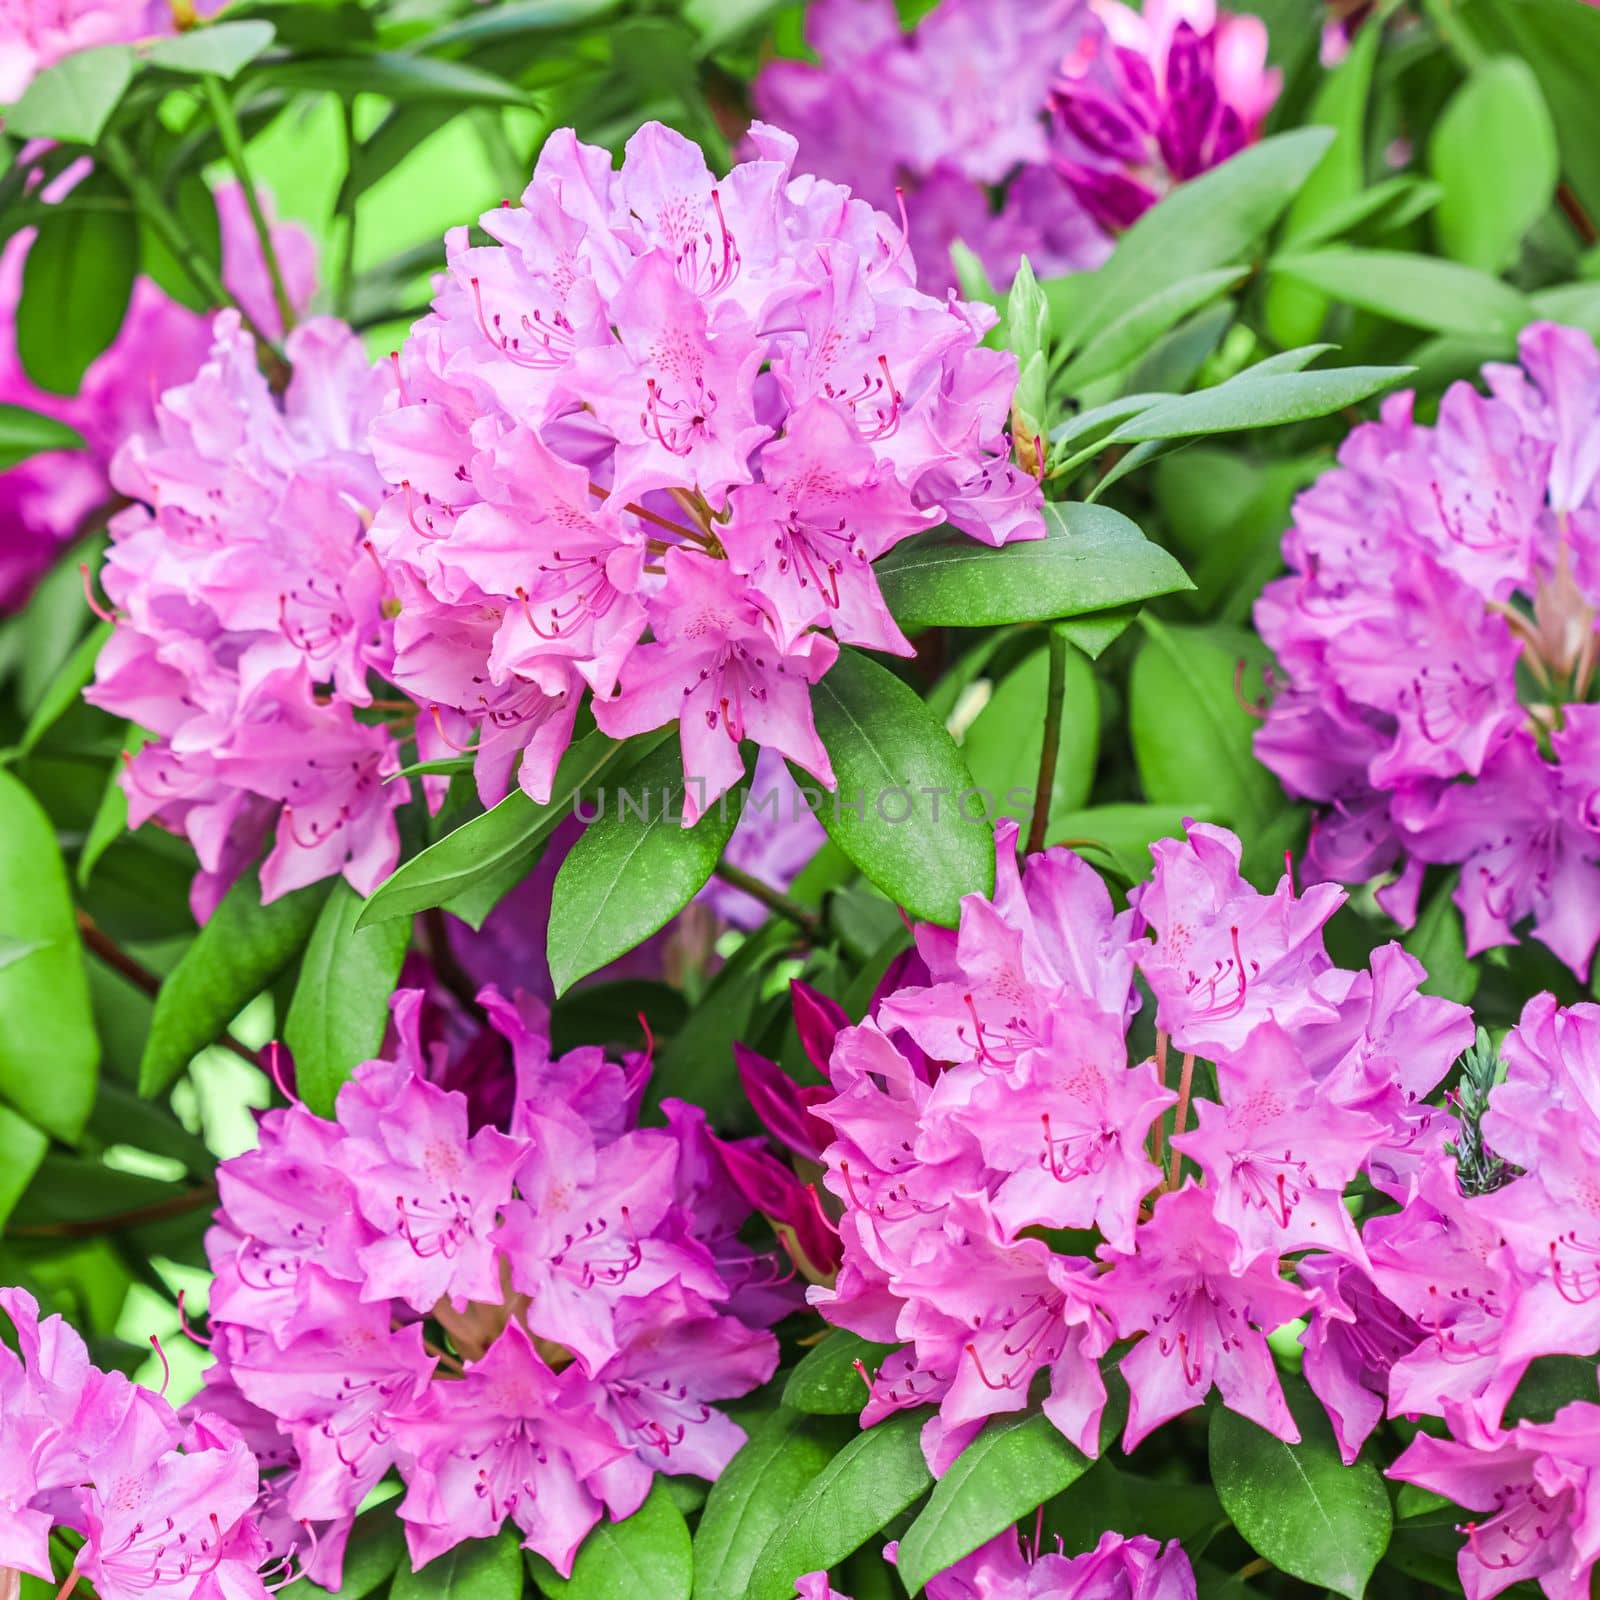 Blooming pink rhododendron flowers in spring on blurred background. Gardening concept. Flower backdrop